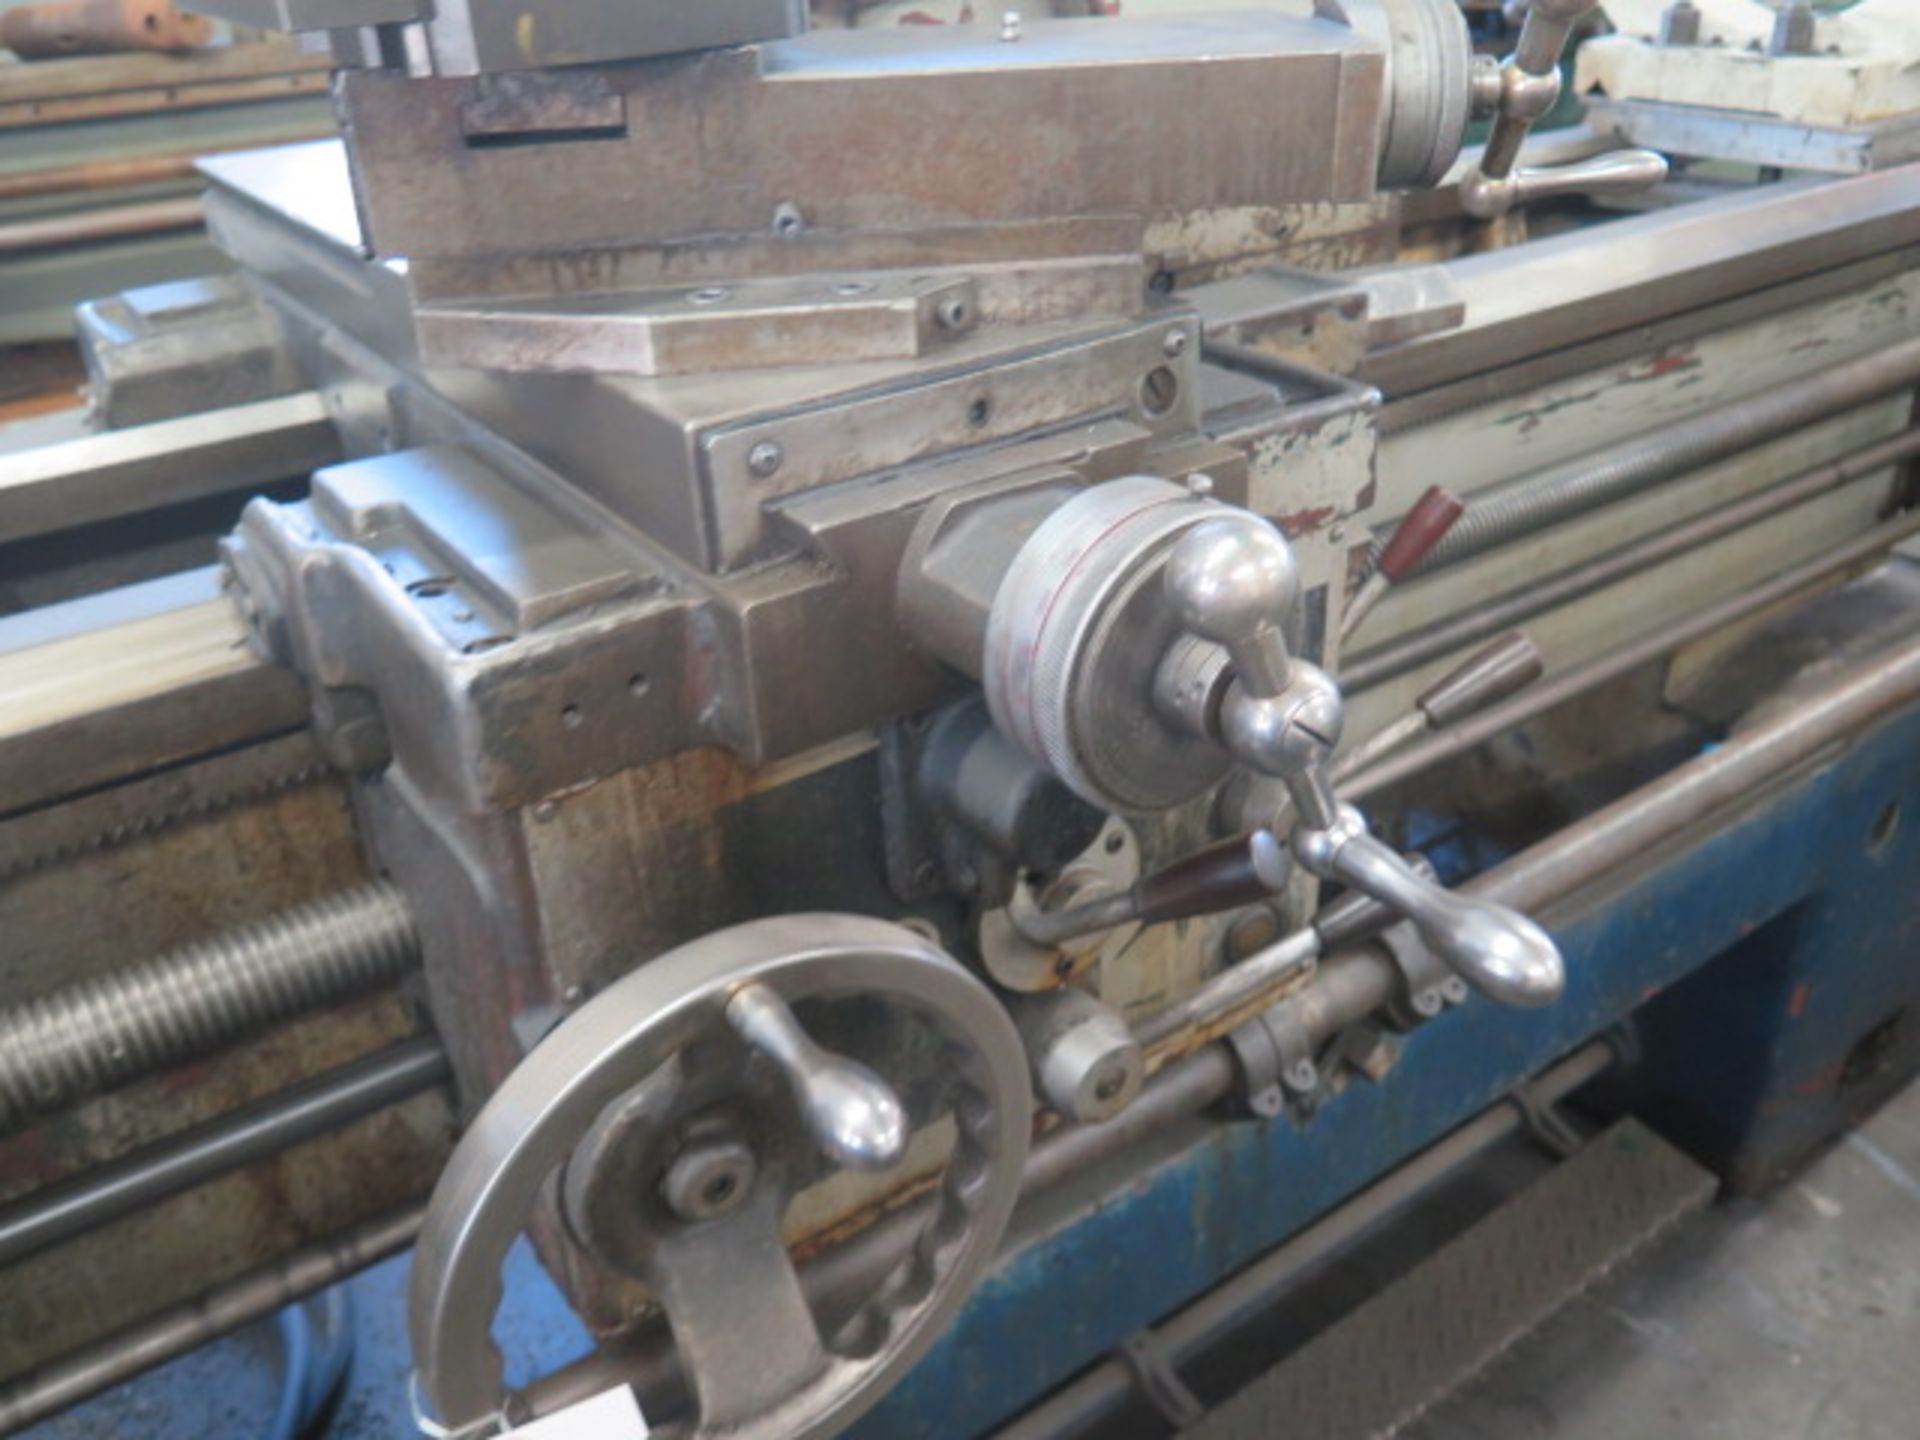 Crown 21” x 60” Geared Gap Bed Lathe w/ Newall Sapphire DRO, 11-1500 RPM, Inch/mm Thread, SOLD AS IS - Image 7 of 10